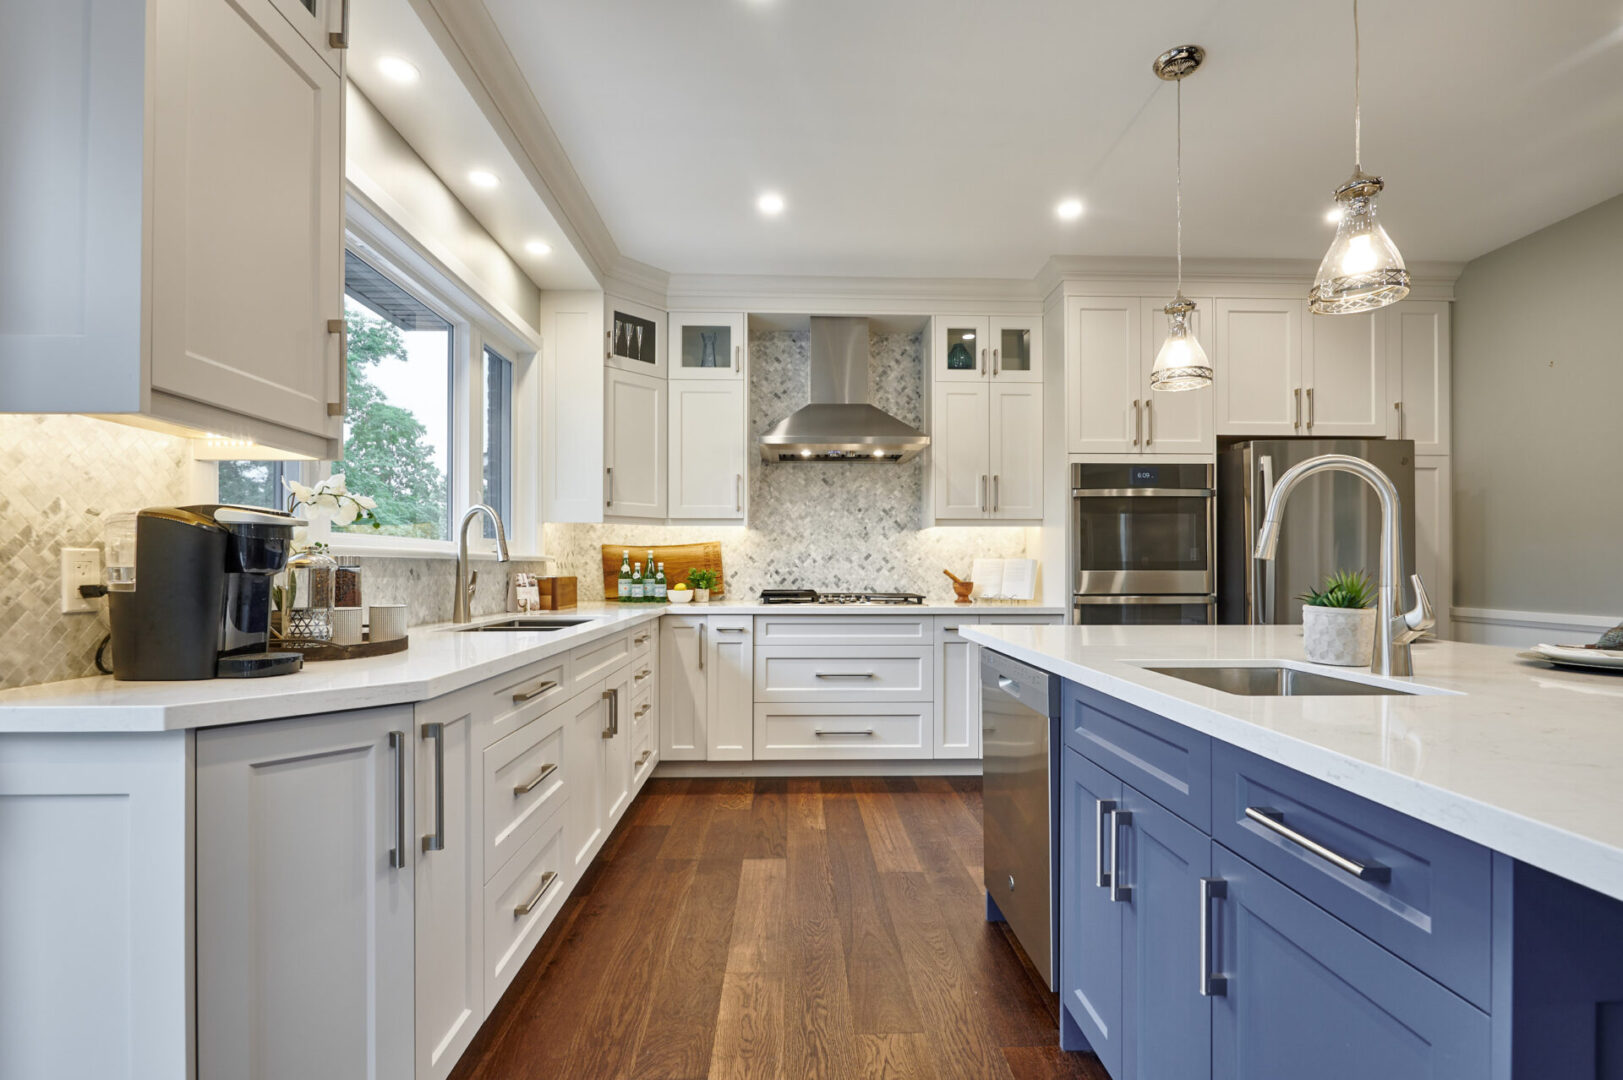 A kitchen with white cabinets and blue island.